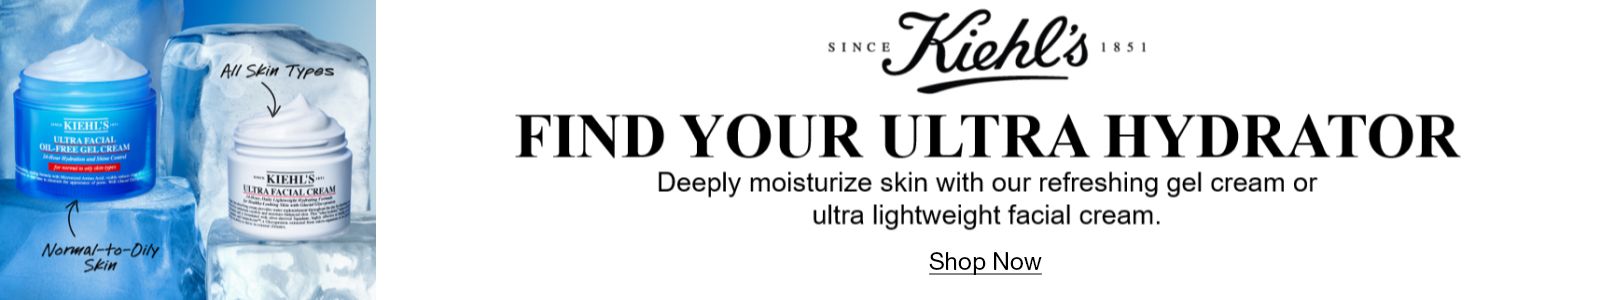 Since Kiehl's, Find Your Ultra Hydrator, Deeply moisturize skin with our refreshing gel cream or ultra lightweight facial cream, Shop Now